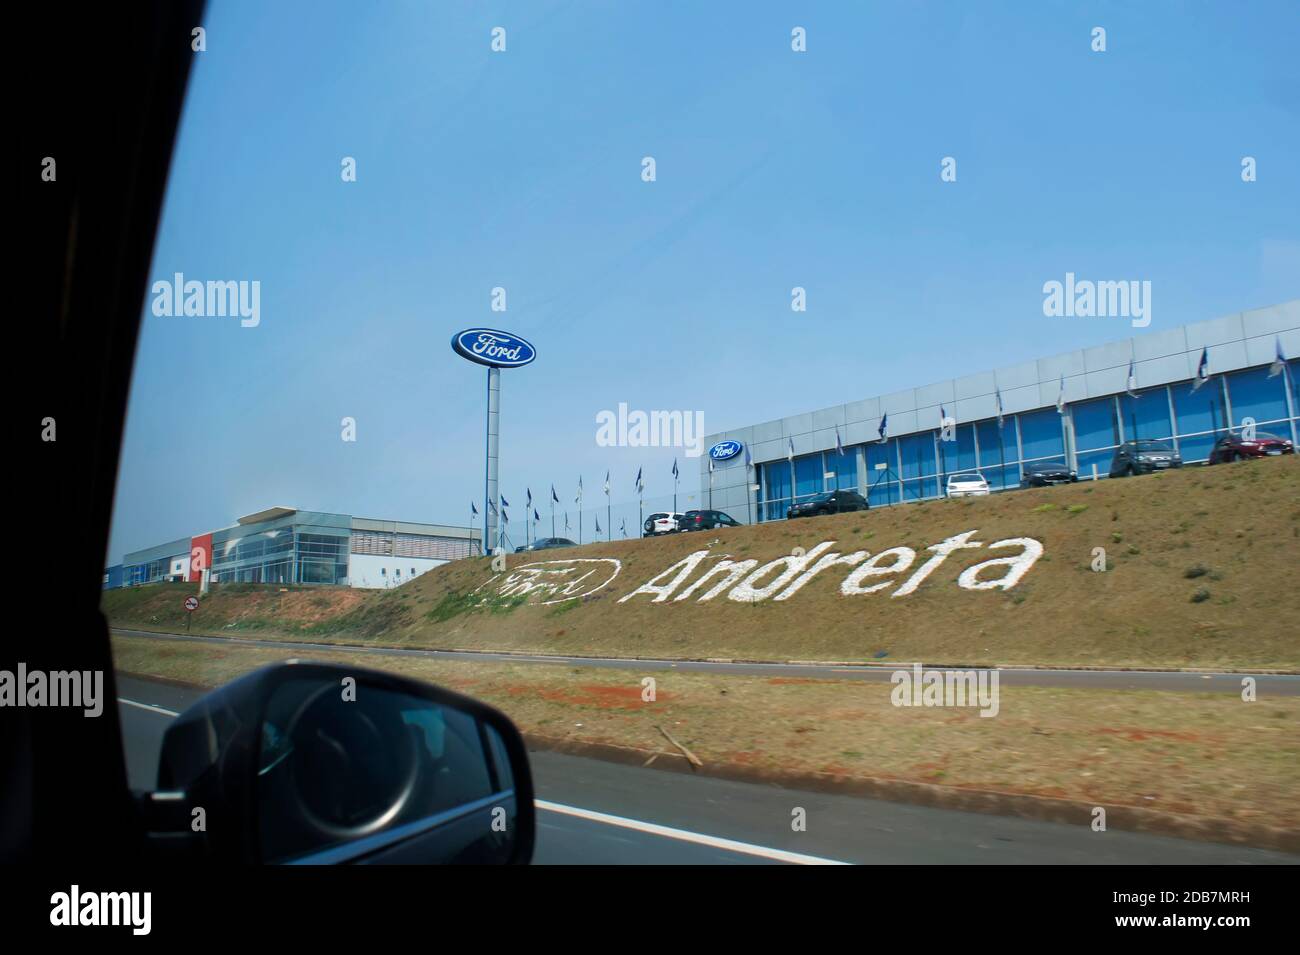 November 9, 2020. Cerquilho, SP, Brazil. A driver's point of view, from the Ford dealership on the highway. Stock Photo